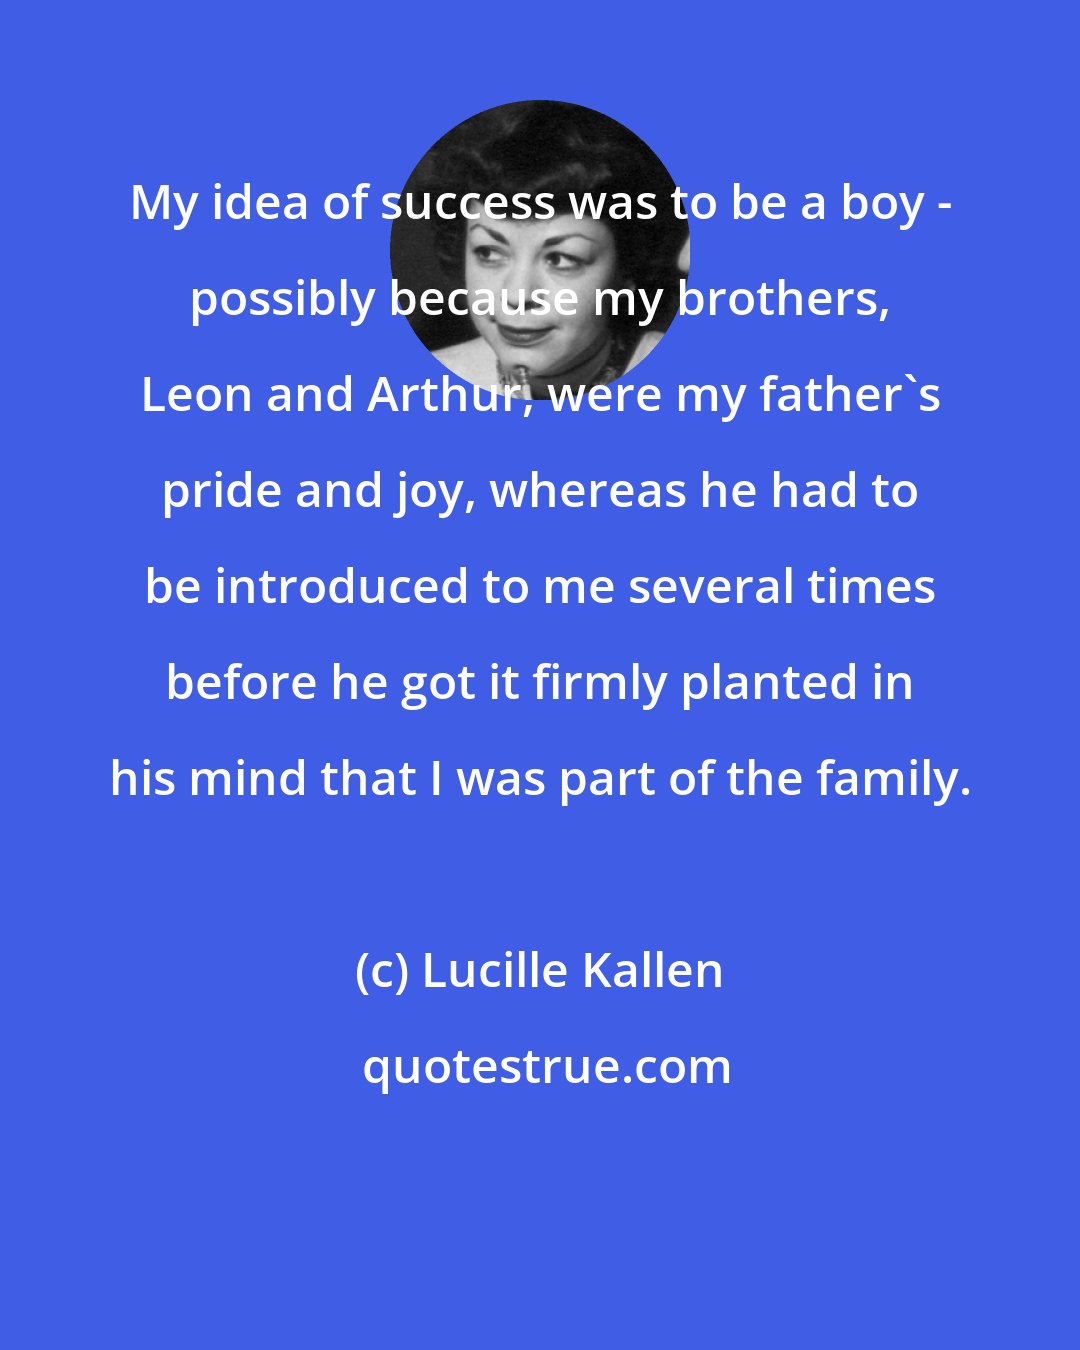 Lucille Kallen: My idea of success was to be a boy - possibly because my brothers, Leon and Arthur, were my father's pride and joy, whereas he had to be introduced to me several times before he got it firmly planted in his mind that I was part of the family.